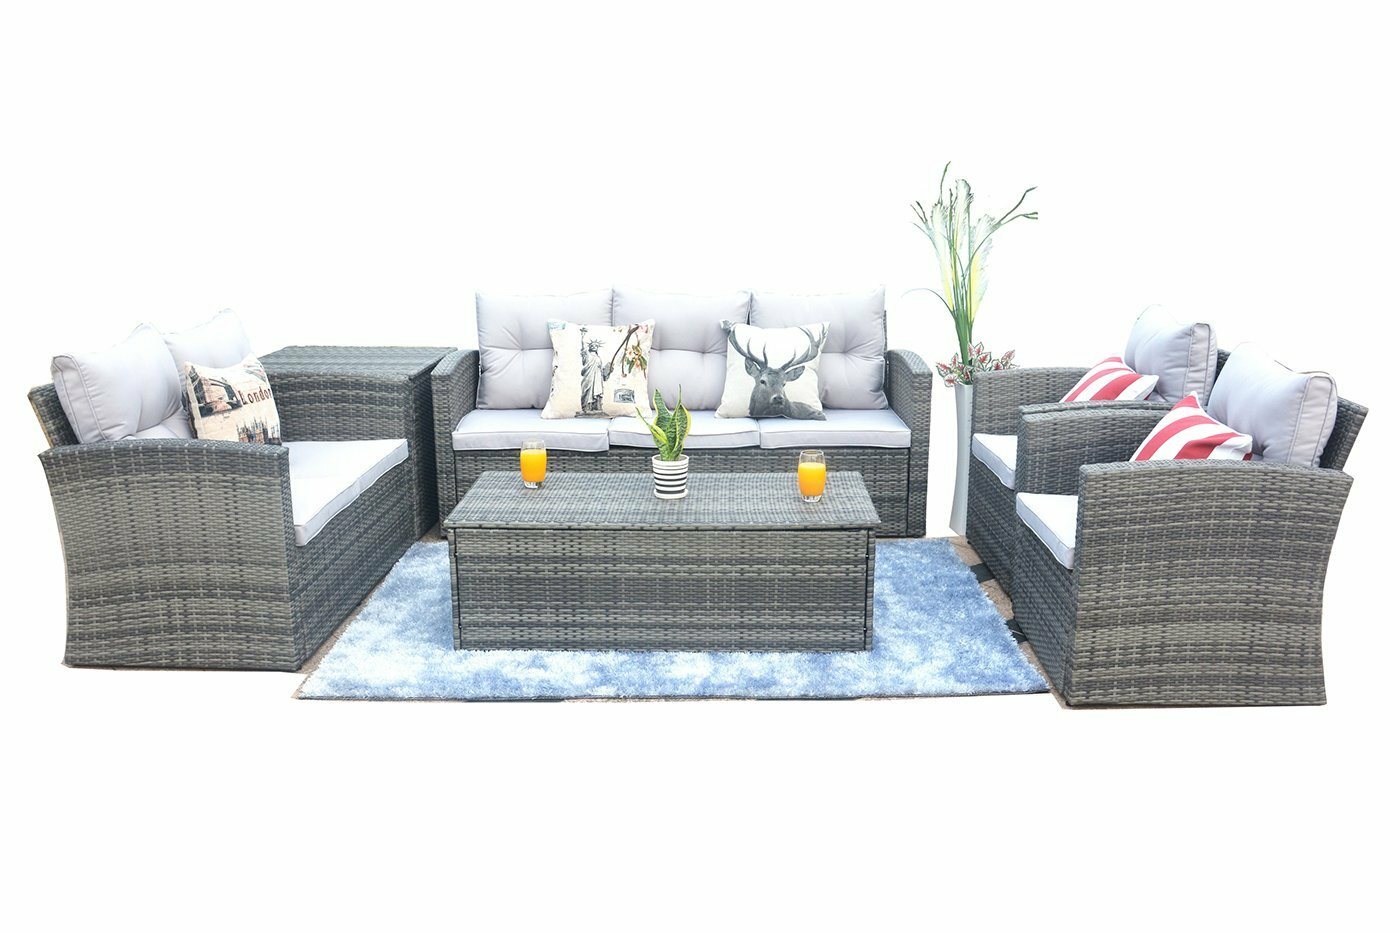 Abrihome Medford 6 Piece Sectional Set with Cushions